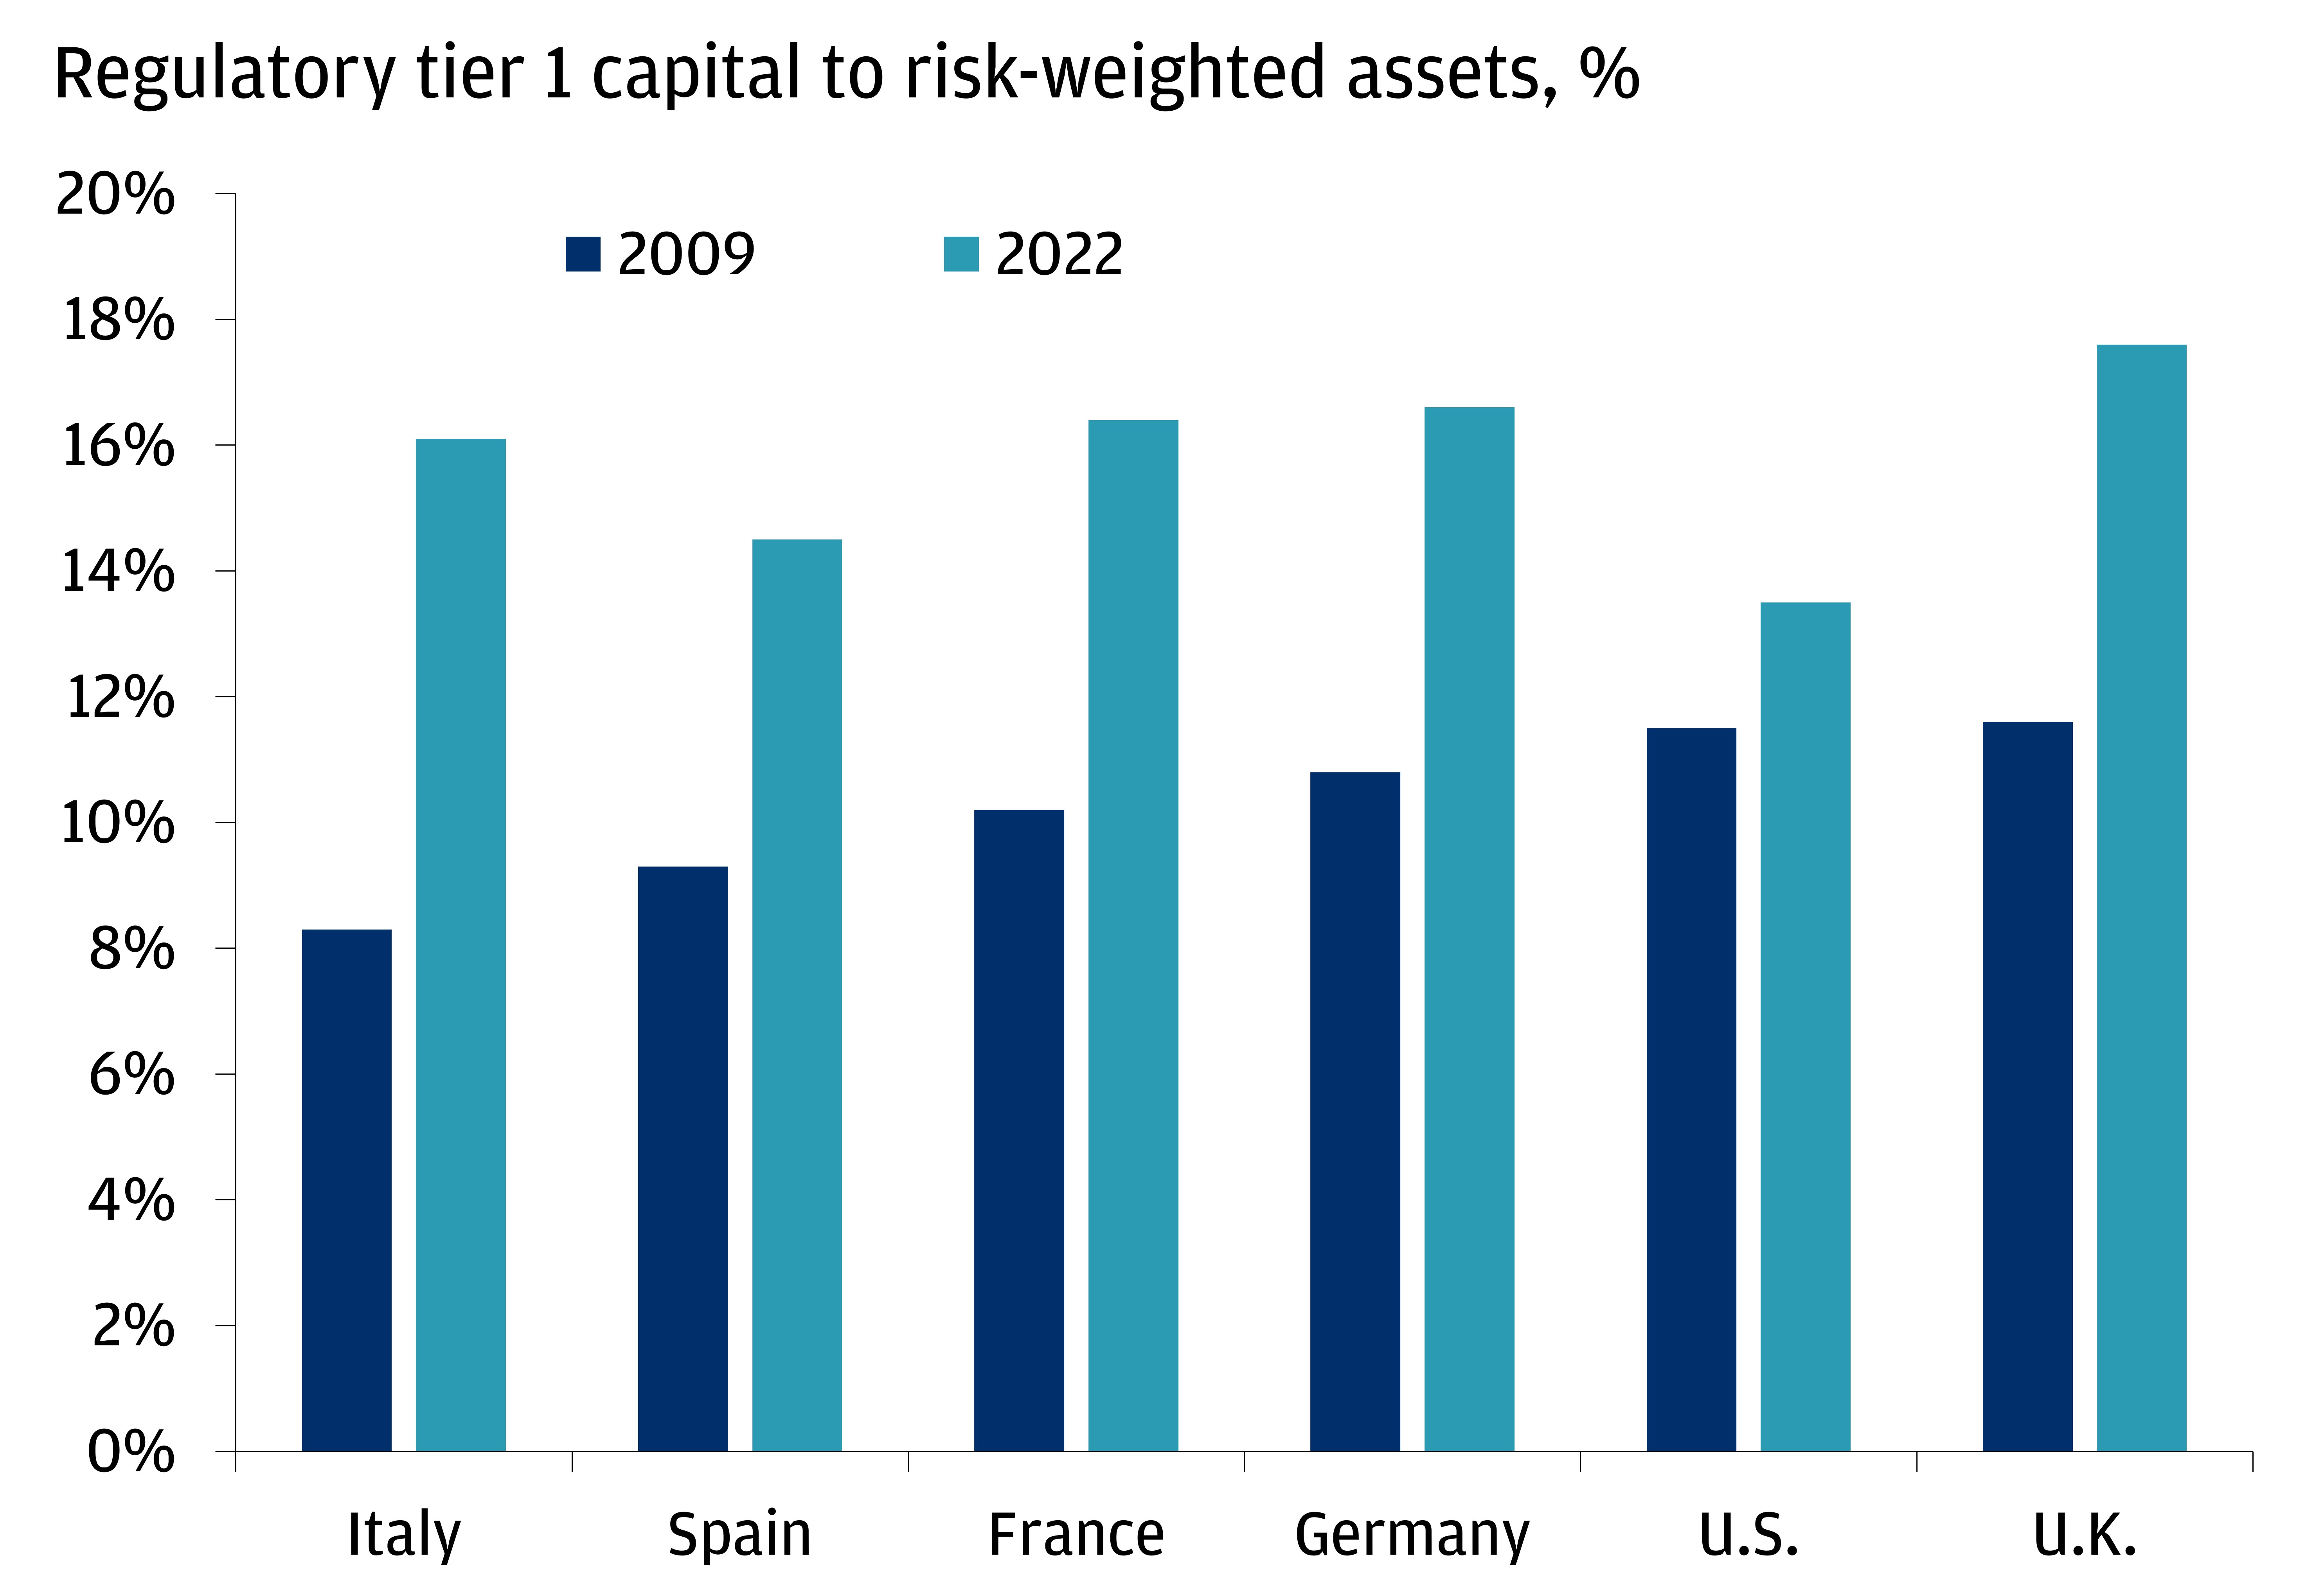 This chart shows regulatory Tier 1 capital to risk-weighted assets (%) in 2009 and 2022 by country